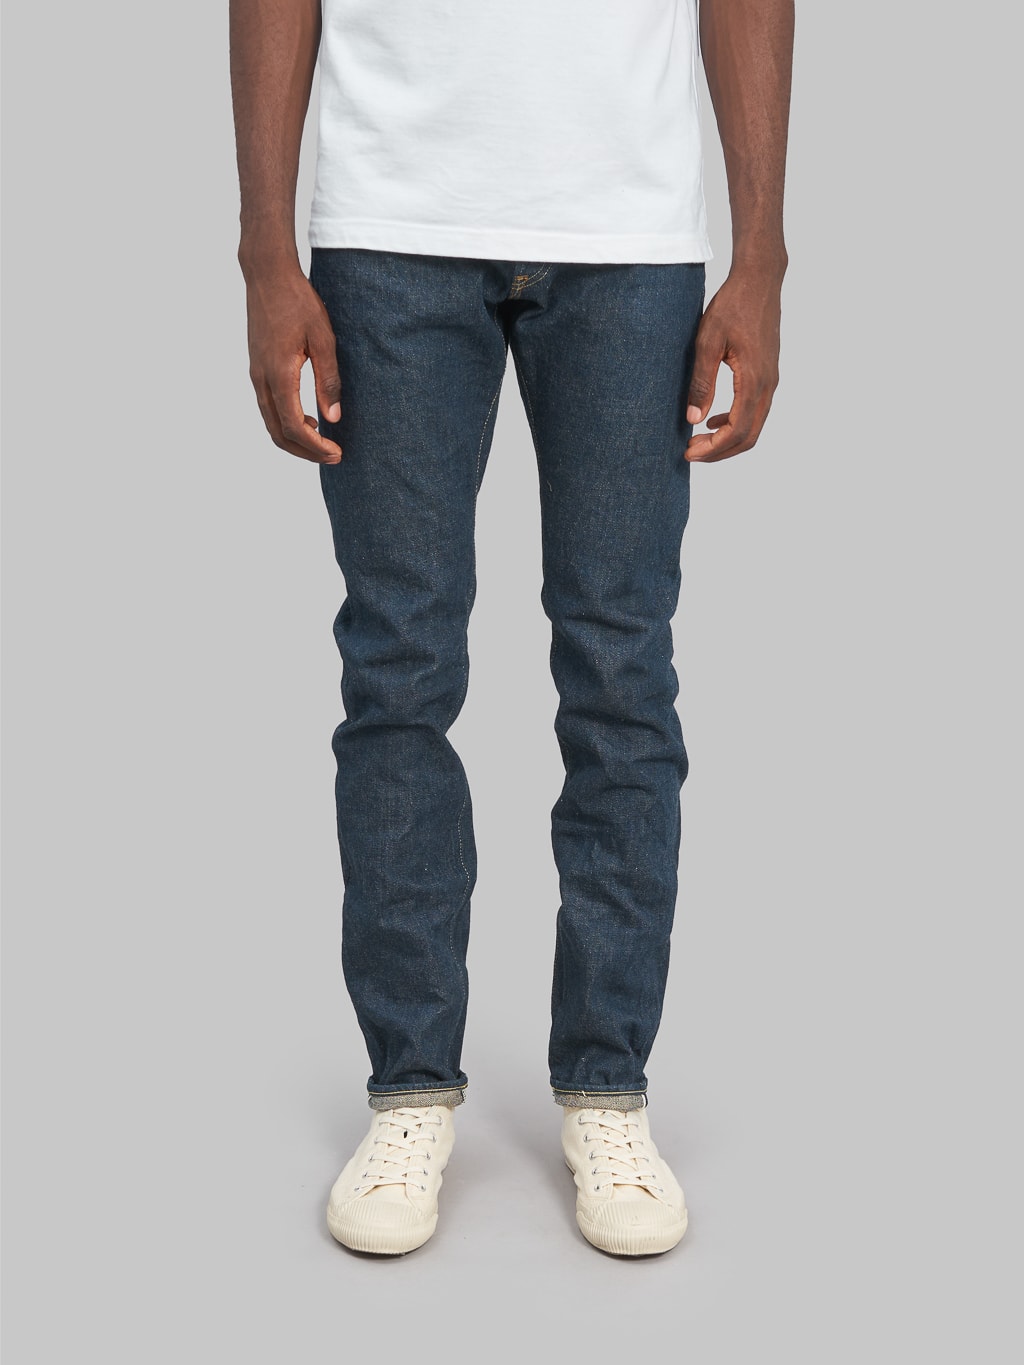 ONI Denim 902 Ishikawadai 15oz Jeans Relaxed tapered front view